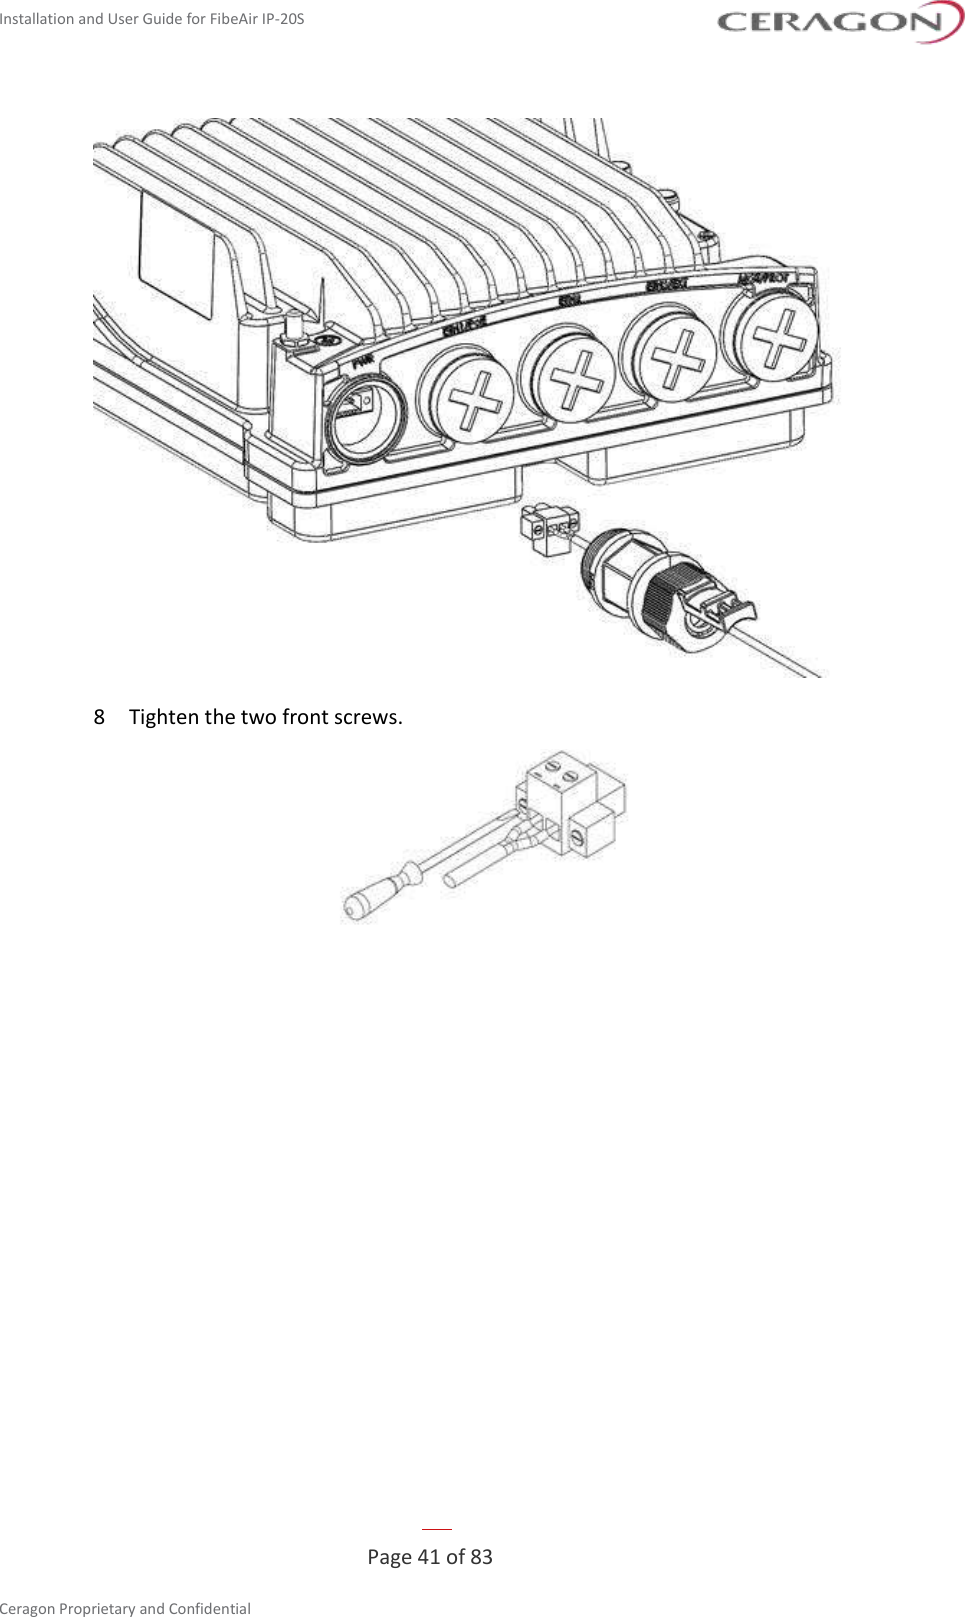 Installation and User Guide for FibeAir IP-20S   Page 41 of 83  Ceragon Proprietary and Confidential      8  Tighten the two front screws.  